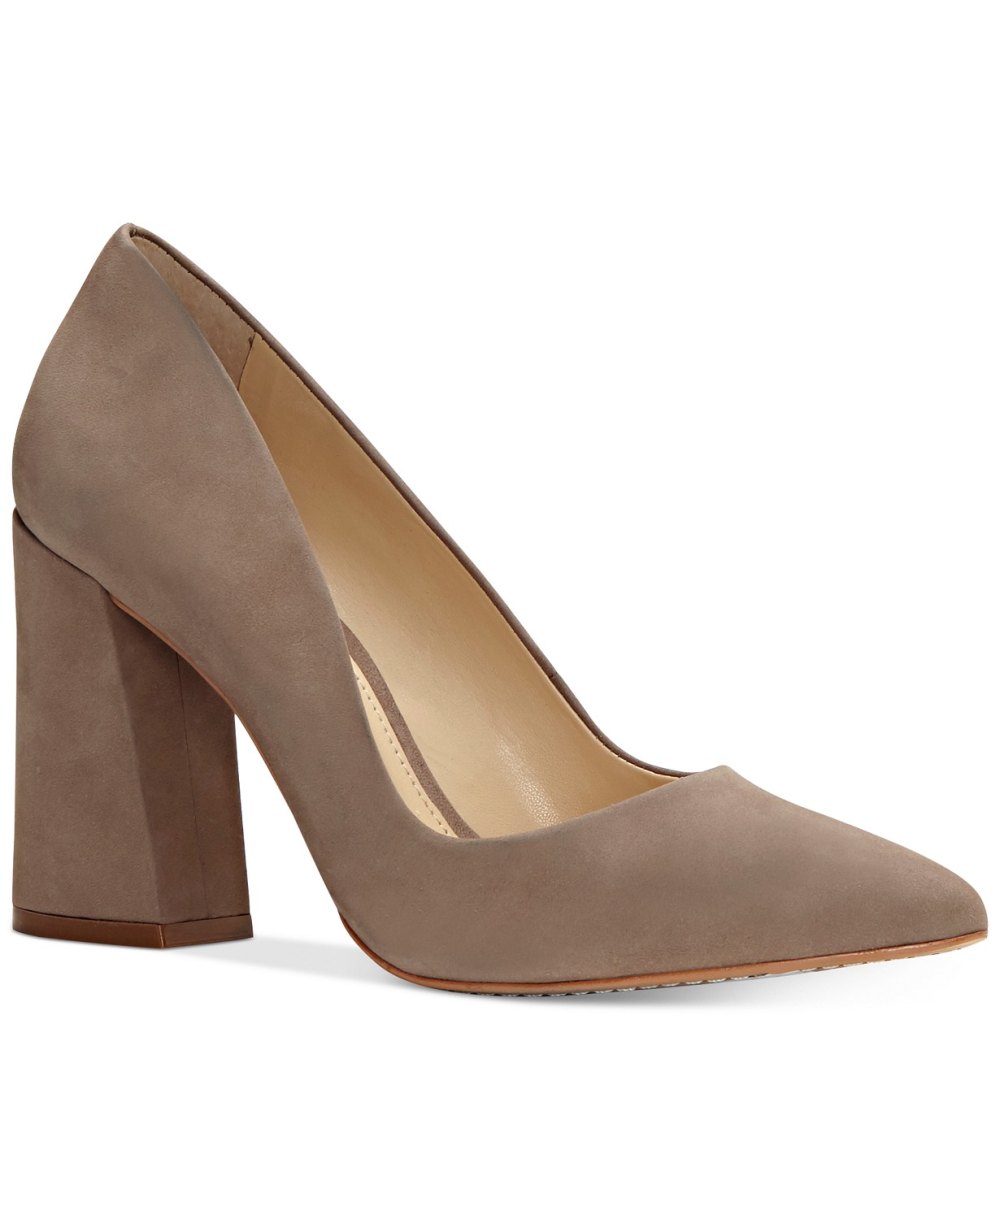 These Chic Vince Camuto Pumps Are on Sale for a Limited Time!